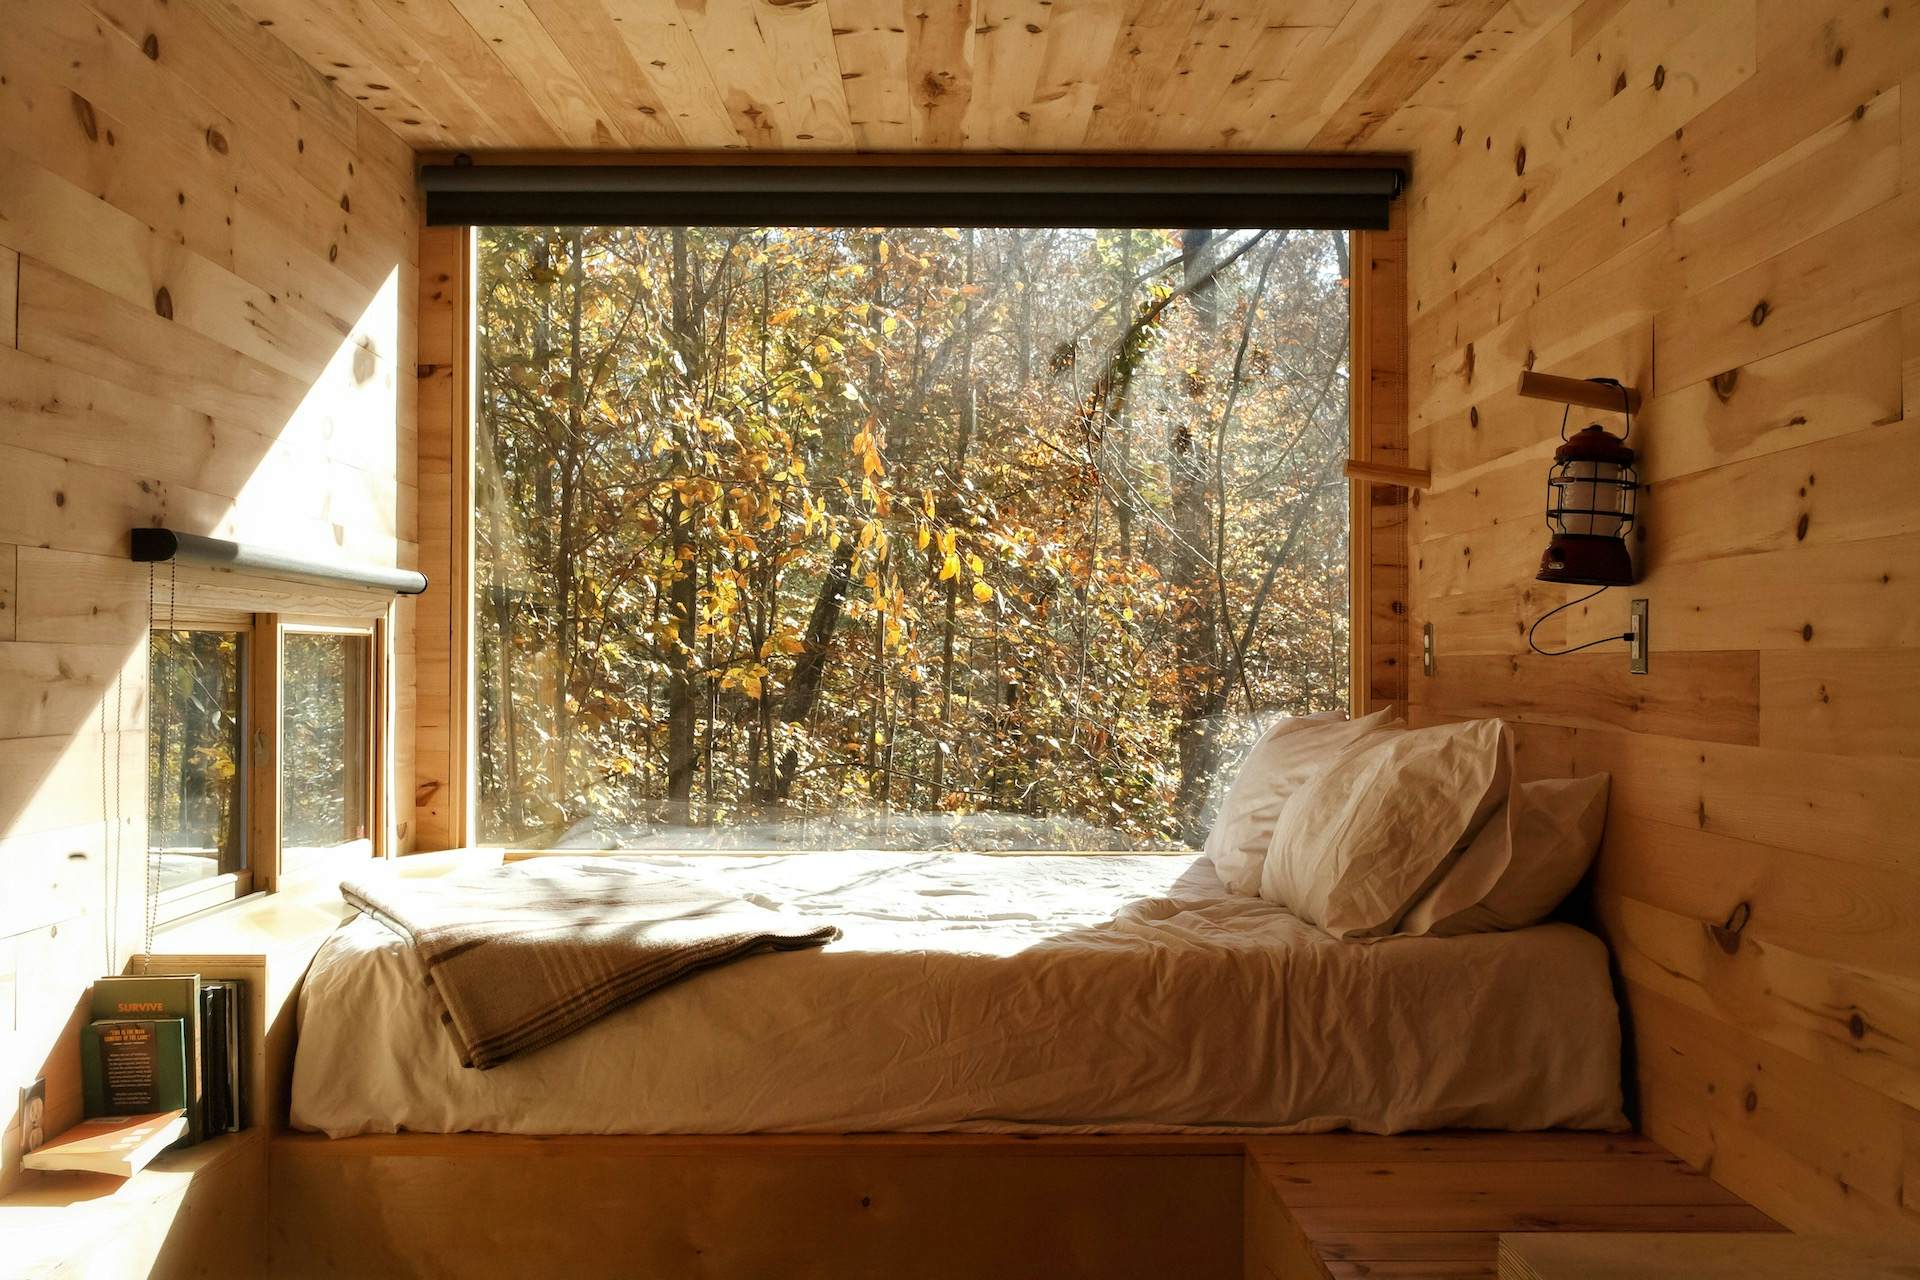 bed inside wooded room with a window looking outside